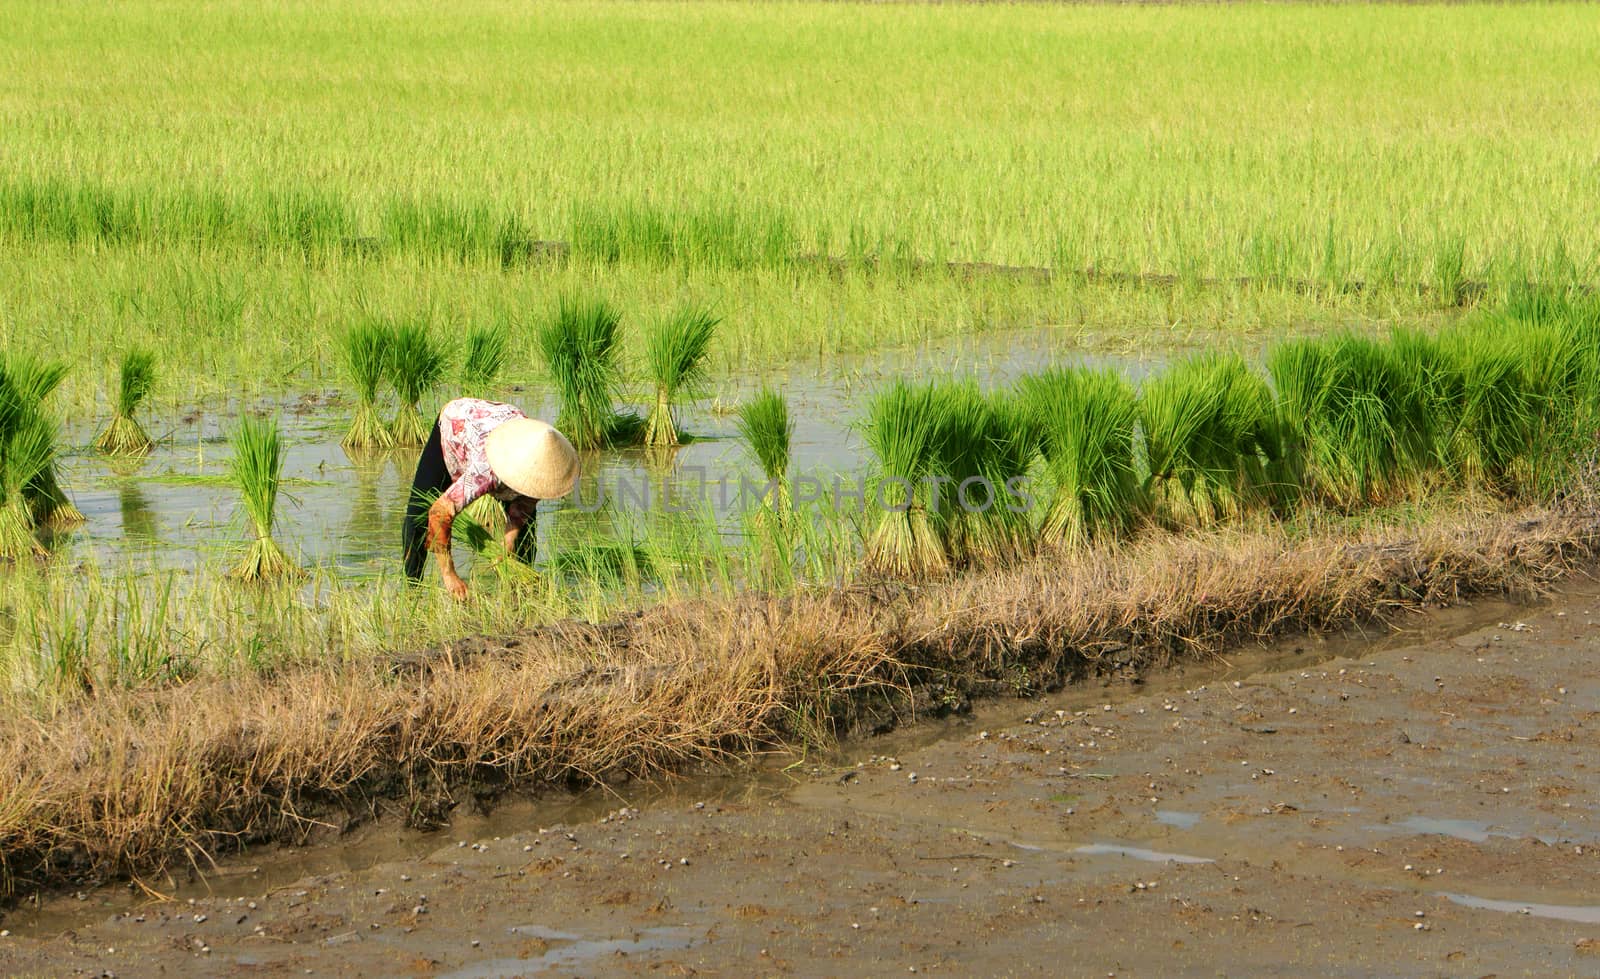 LONG AN, VIET NAM- JULY 10: Farmer working on rice field, they sowing rice seeds in Long An, Viet Nam, Oct 7, 2012 